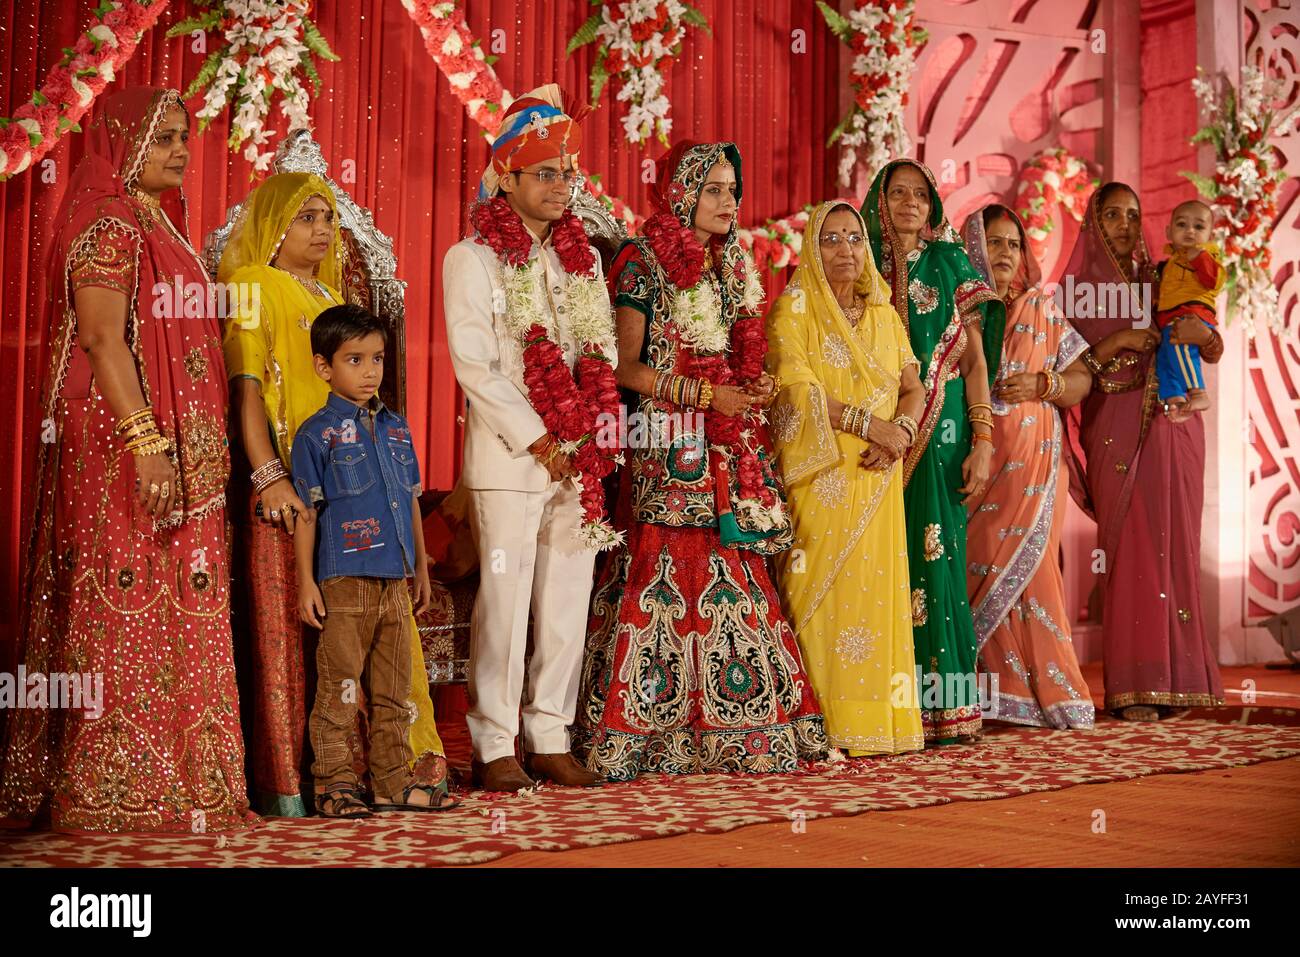 bridal couple with guests on traditional Indian wedding, Jodhpur, Rajasthan, India Stock Photo